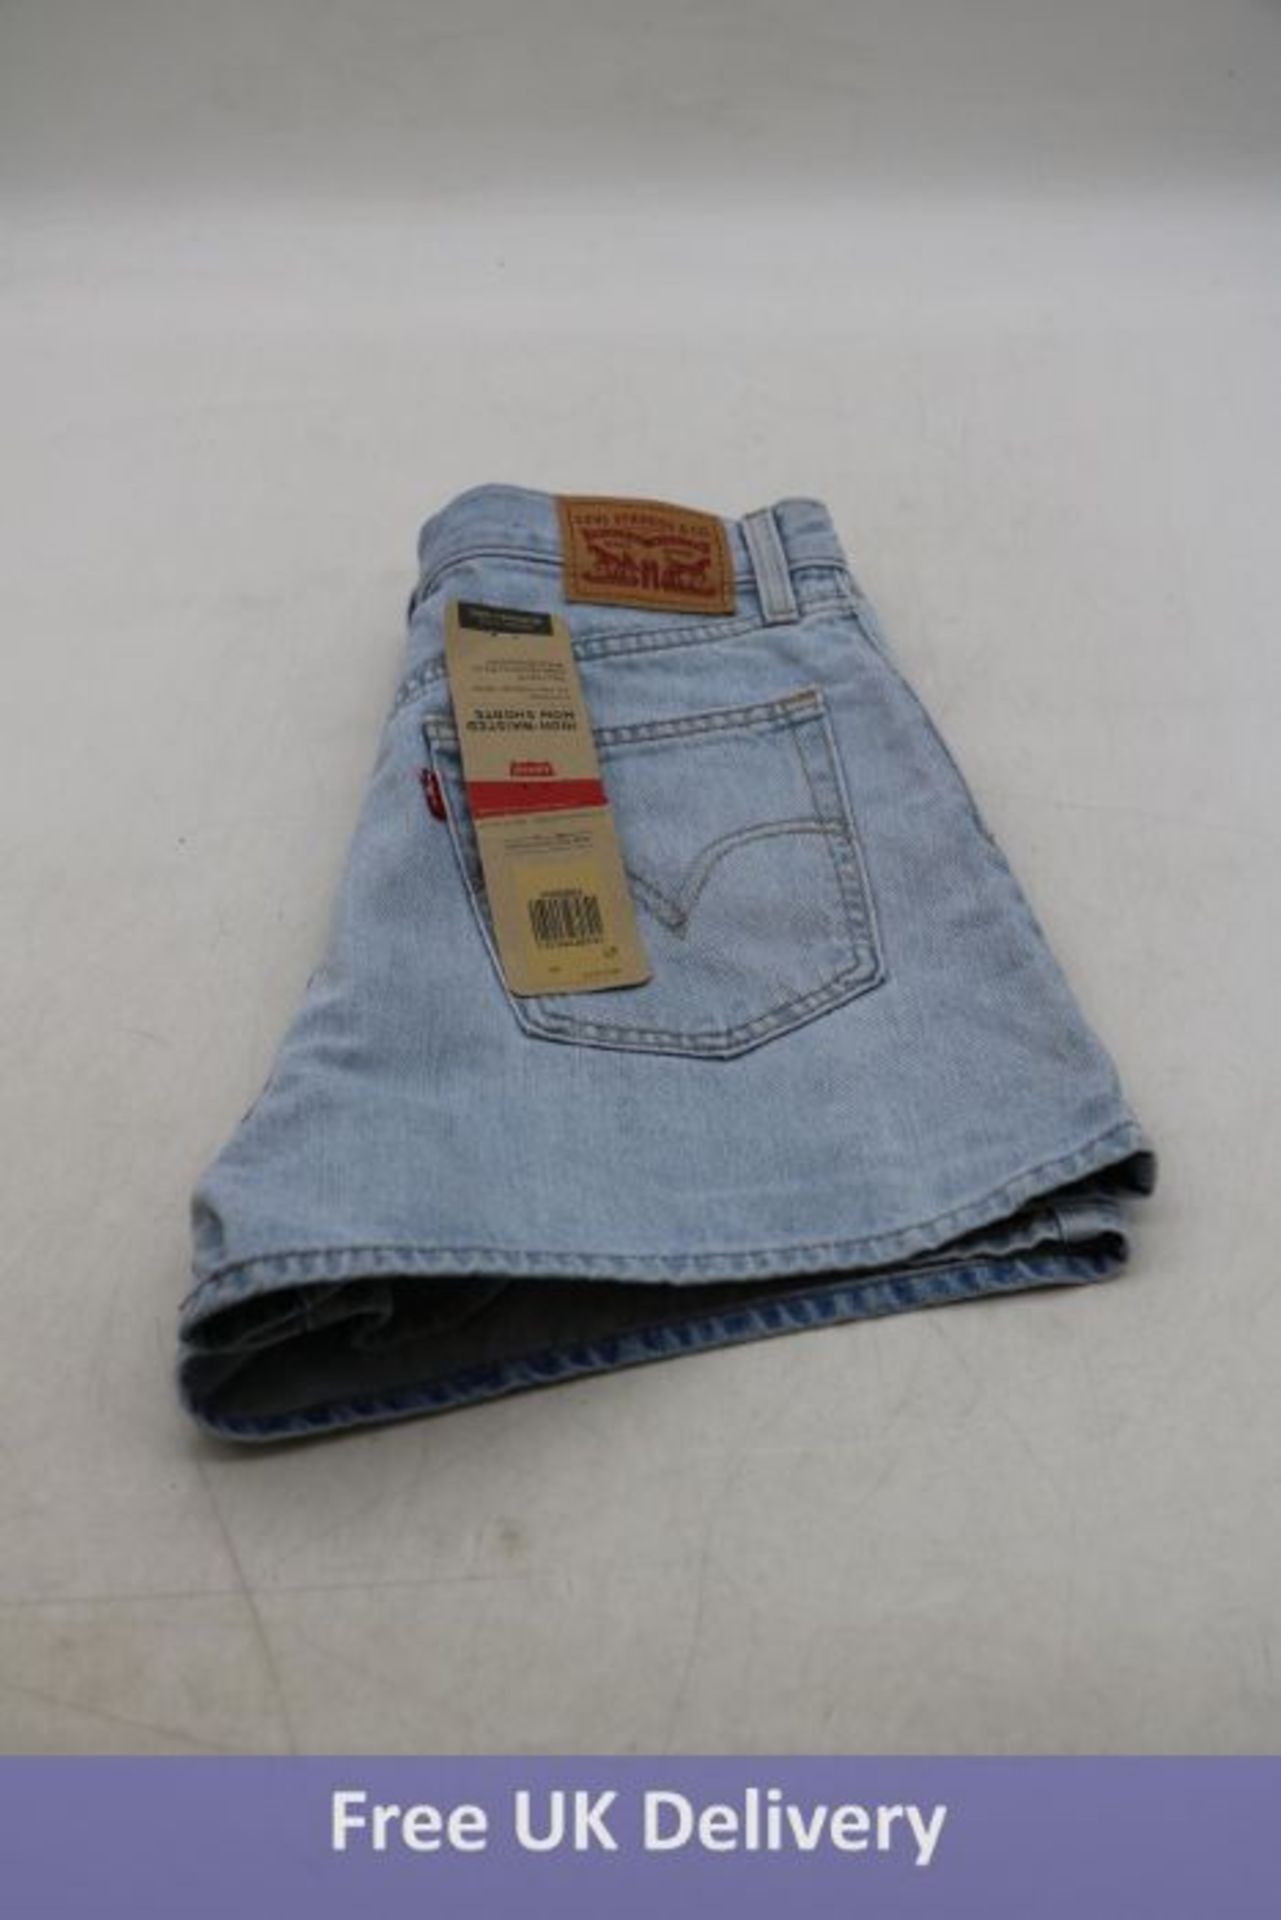 Two items of Levis Women's Clothing to include 1x High-Waisted Mom Shorts, Light Blue, Size 29 and 1